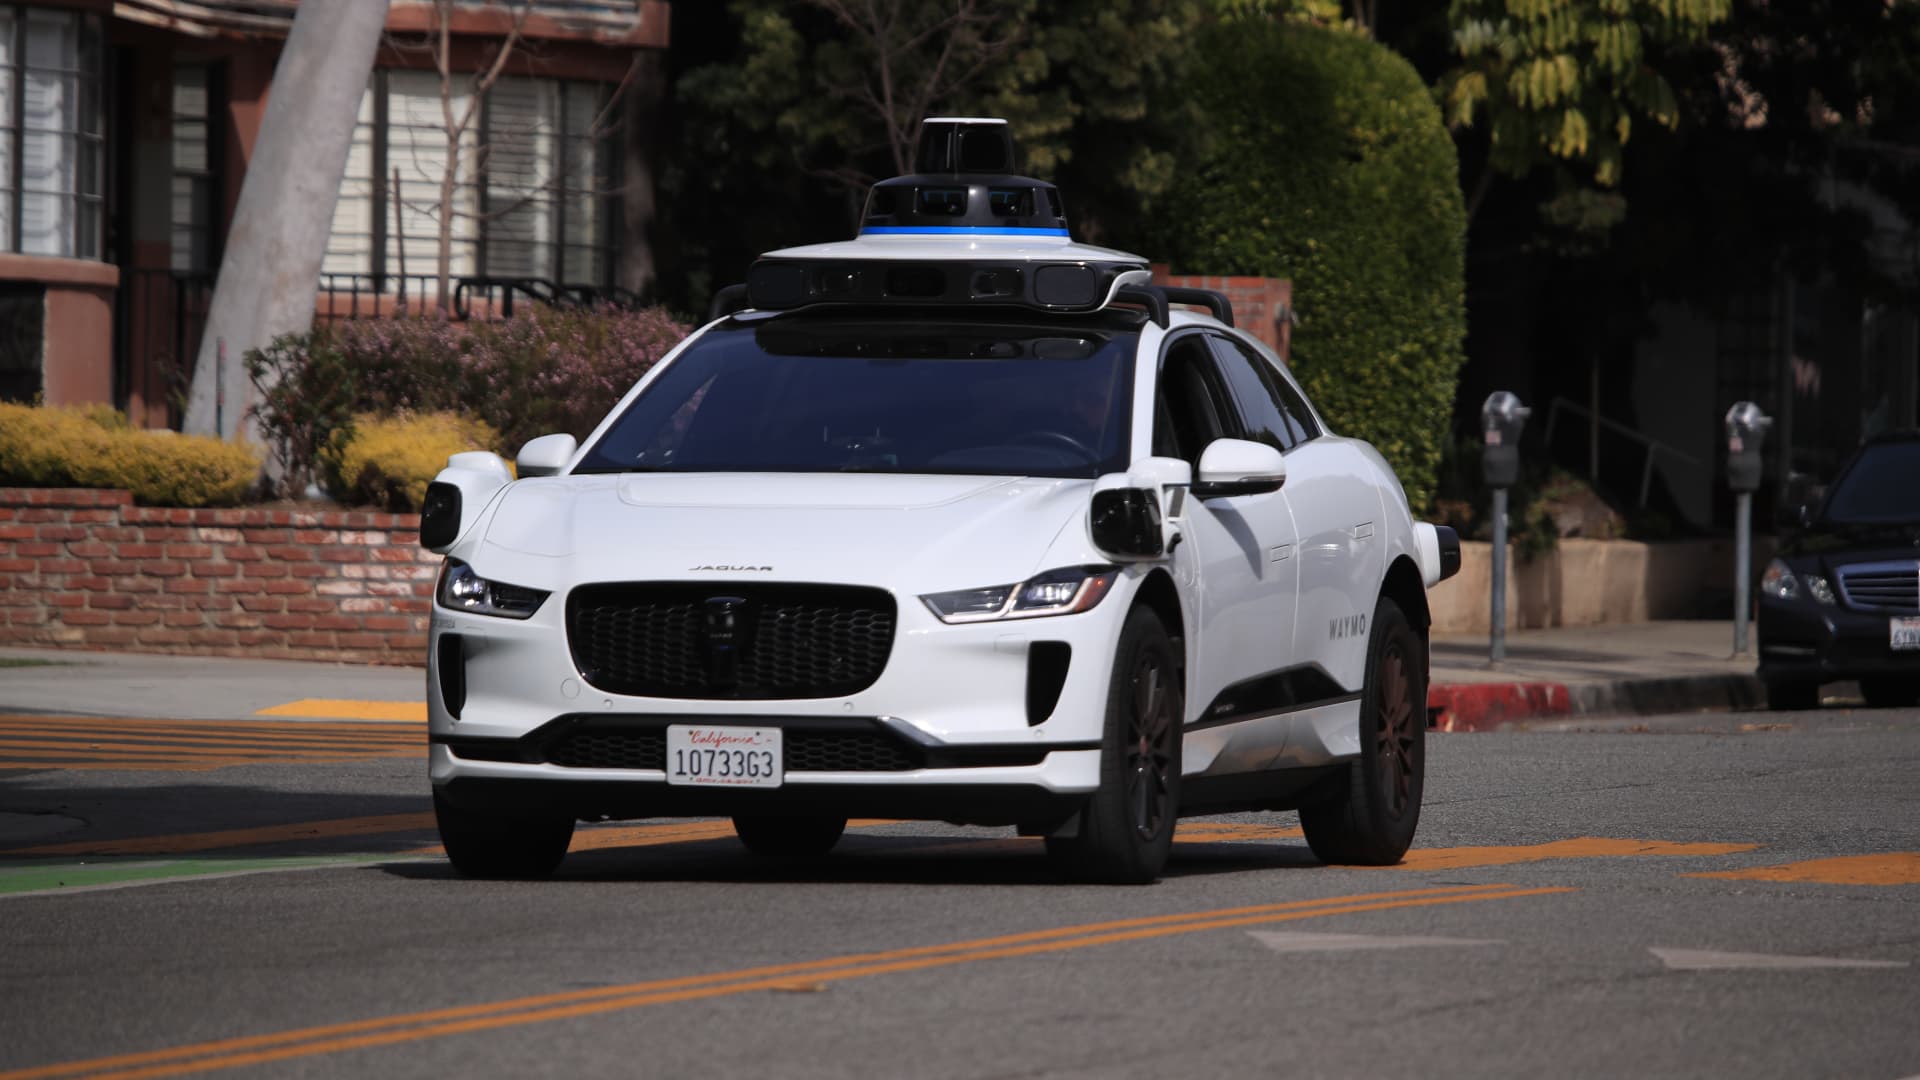 Uber to offer autonomous ride-hailing and delivery using Waymo’s robotaxis